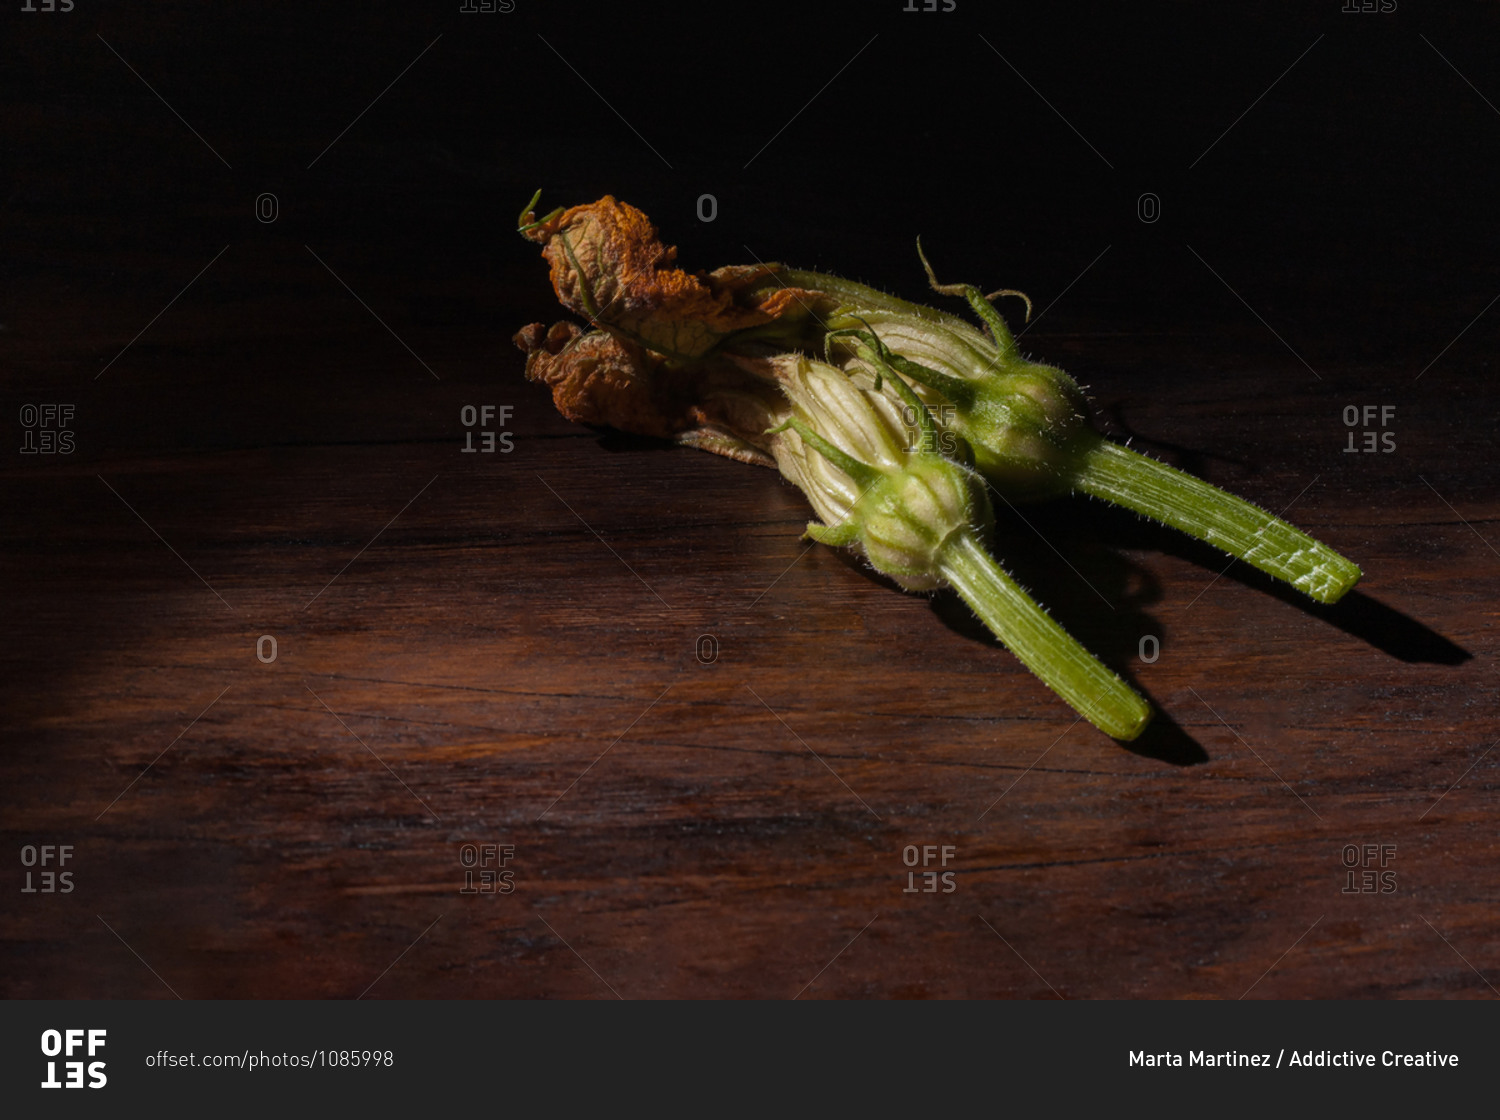 Baroque painting style still life with fresh edible zucchini flowers composed on dark wooden surface with pictorial light